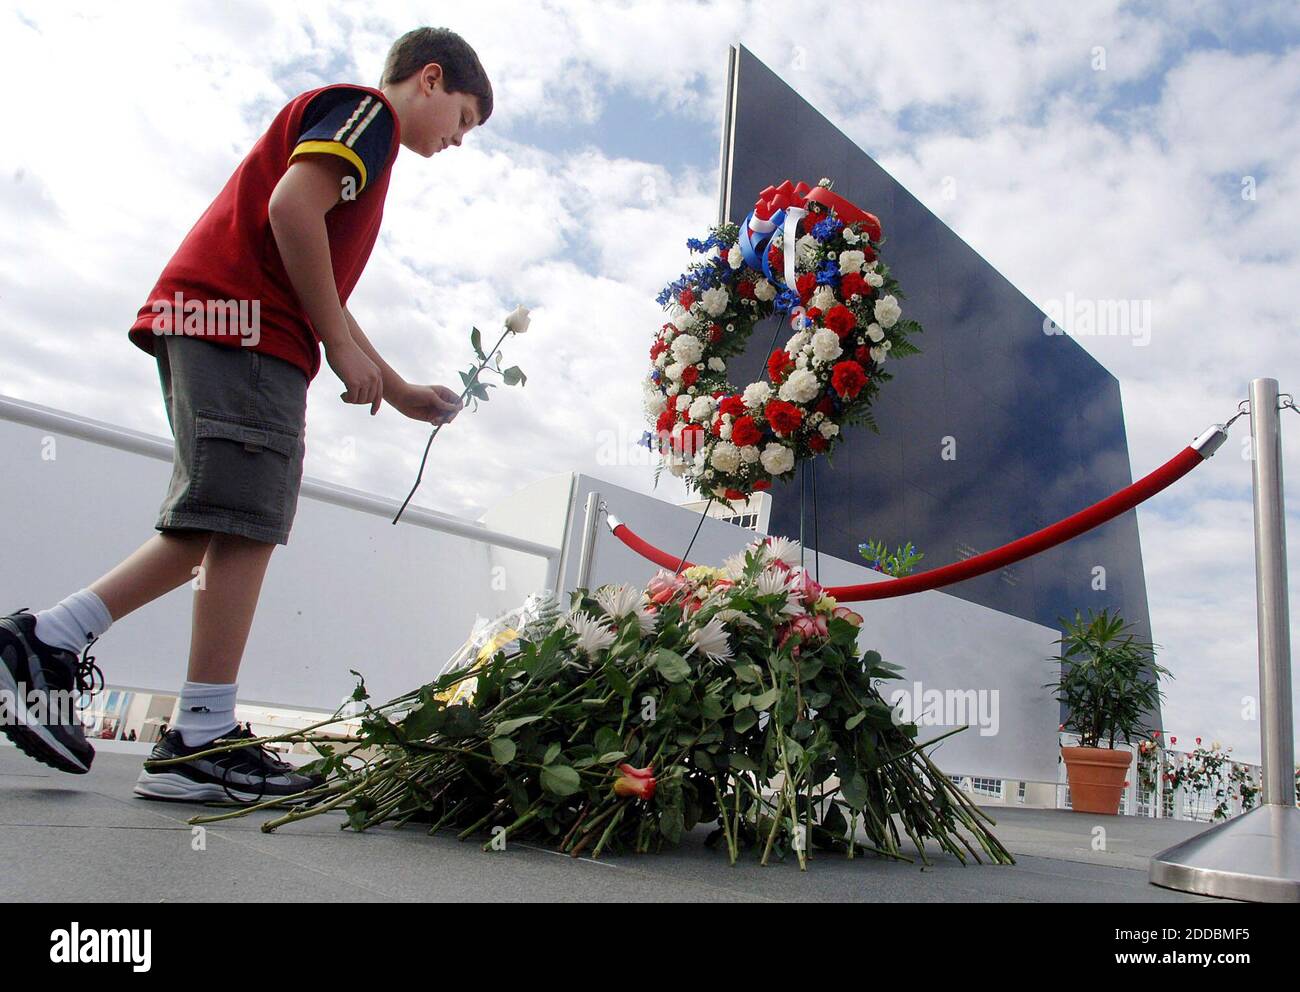 NO FILM, NO VIDEO, NO TV, NO DOCUMENTARY - Joel Scheving, 11, of Moorehead, Minnesota, places a flower near the Space Memorial Mirror at Kennedy Space Center Visitors Complex, Florida, Saturday, January 28, 2006. Astronauts Memorial Foundation conducted a ceremony to honor the crew of Challenger STS 51L and all astronauts who have sacrificed their lives on the 20th anniversary of the Challenger accident. Photo by Red Huber/Orlando Sentinel/KRT/ABACAPRESS.COM Stock Photo